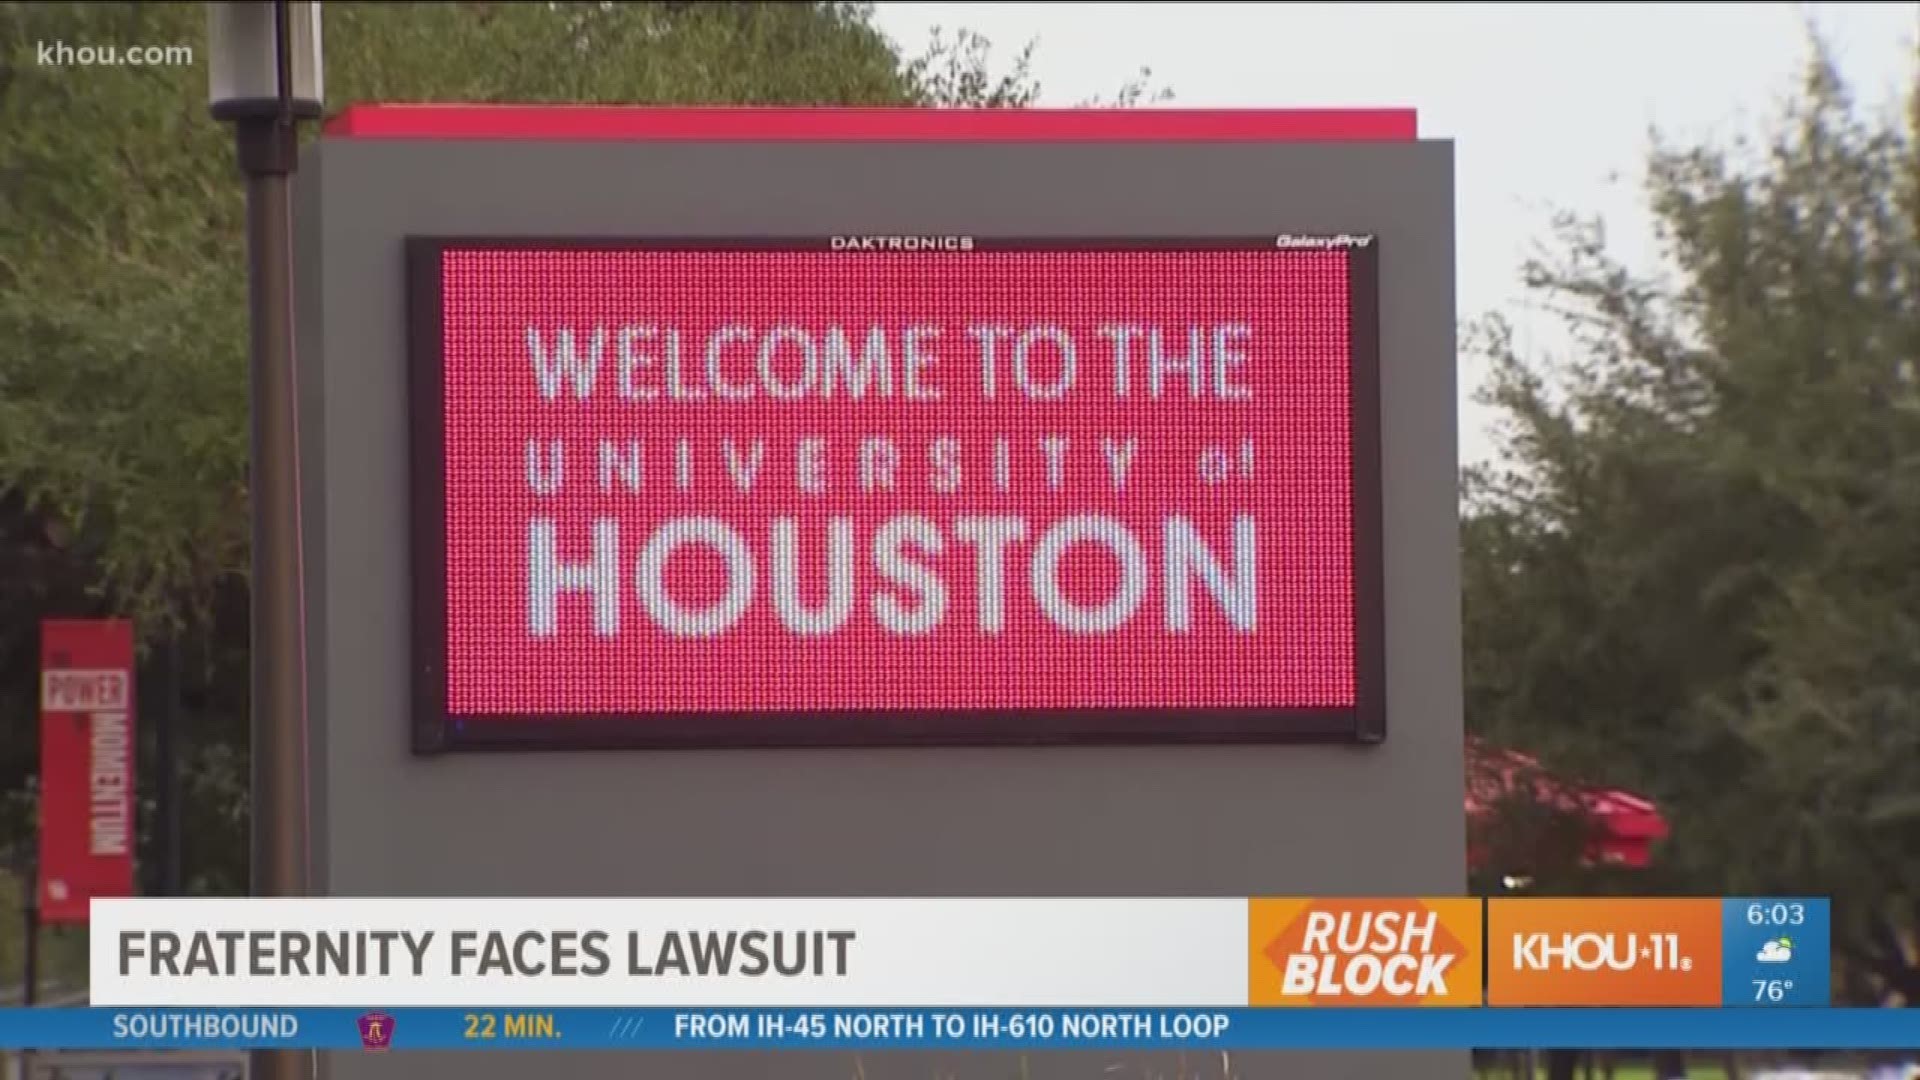 A former fraternity pledge at the University of Houston is suing Pi Kappa Alpha fraternity, along with more than two dozen individuals in connection with alleged hazing in 2016.